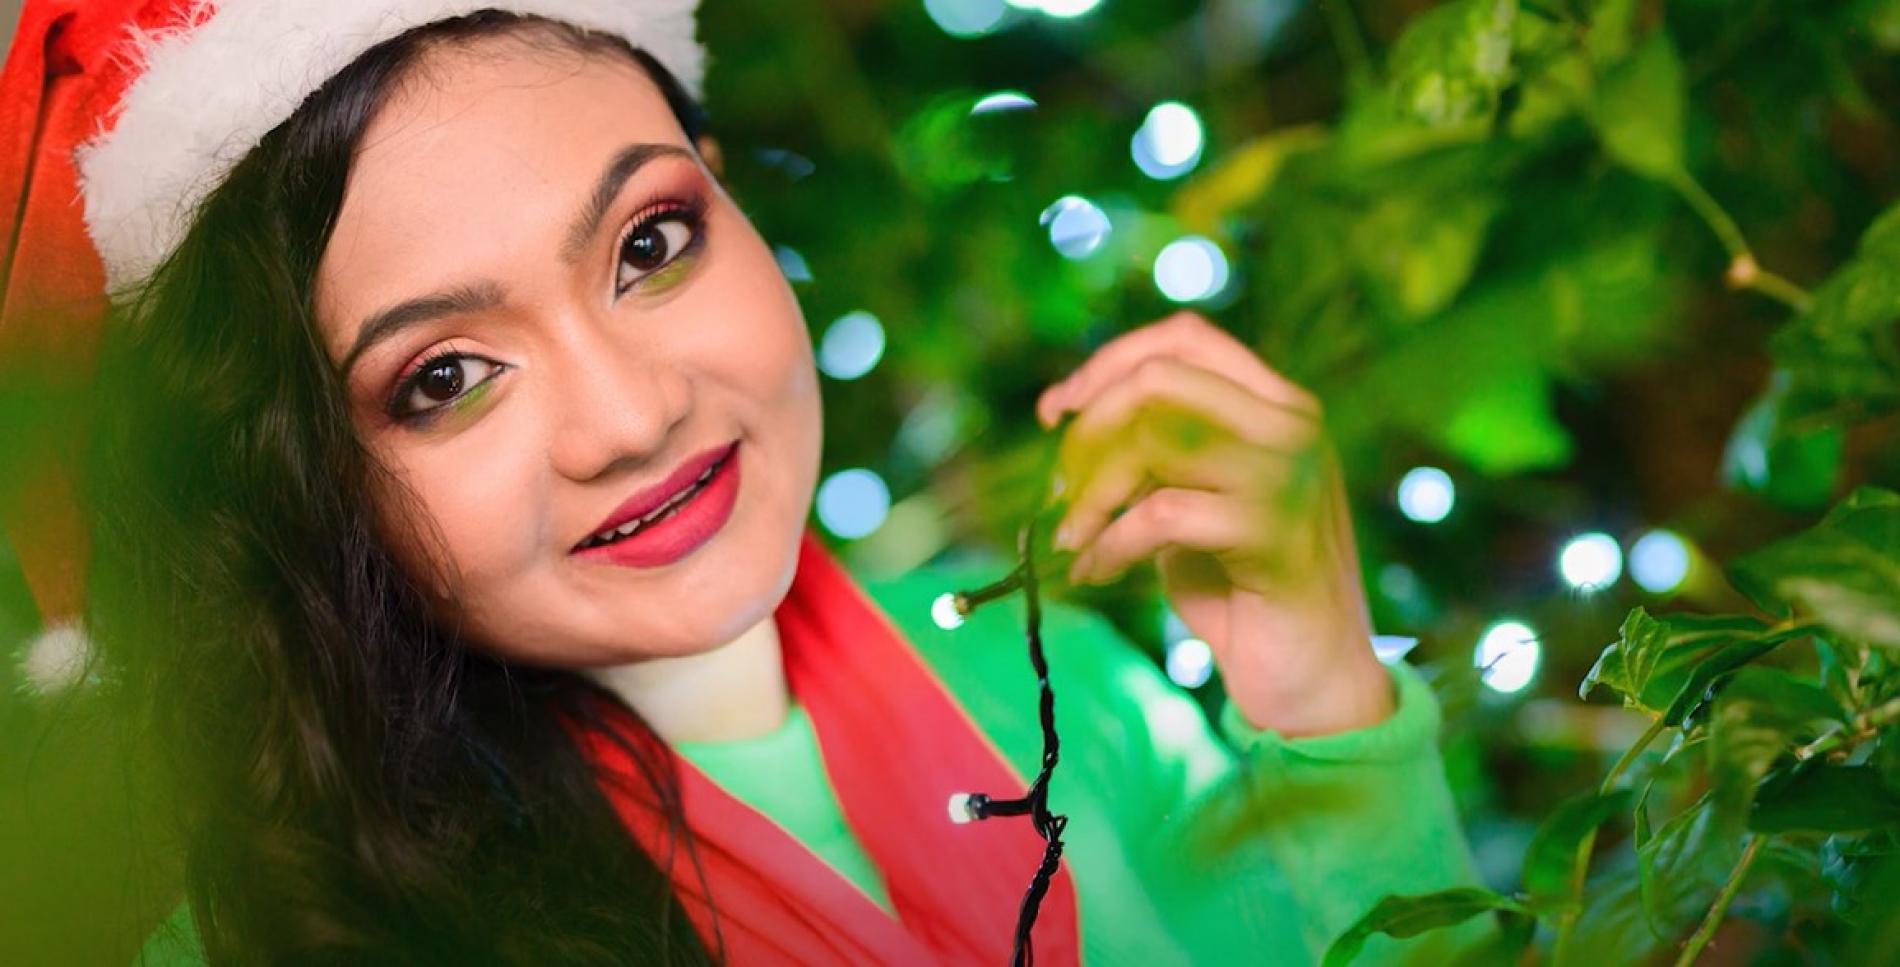 New Music : Have Yourself A Merry Little Christmas (Cover) by Nushika Fernando